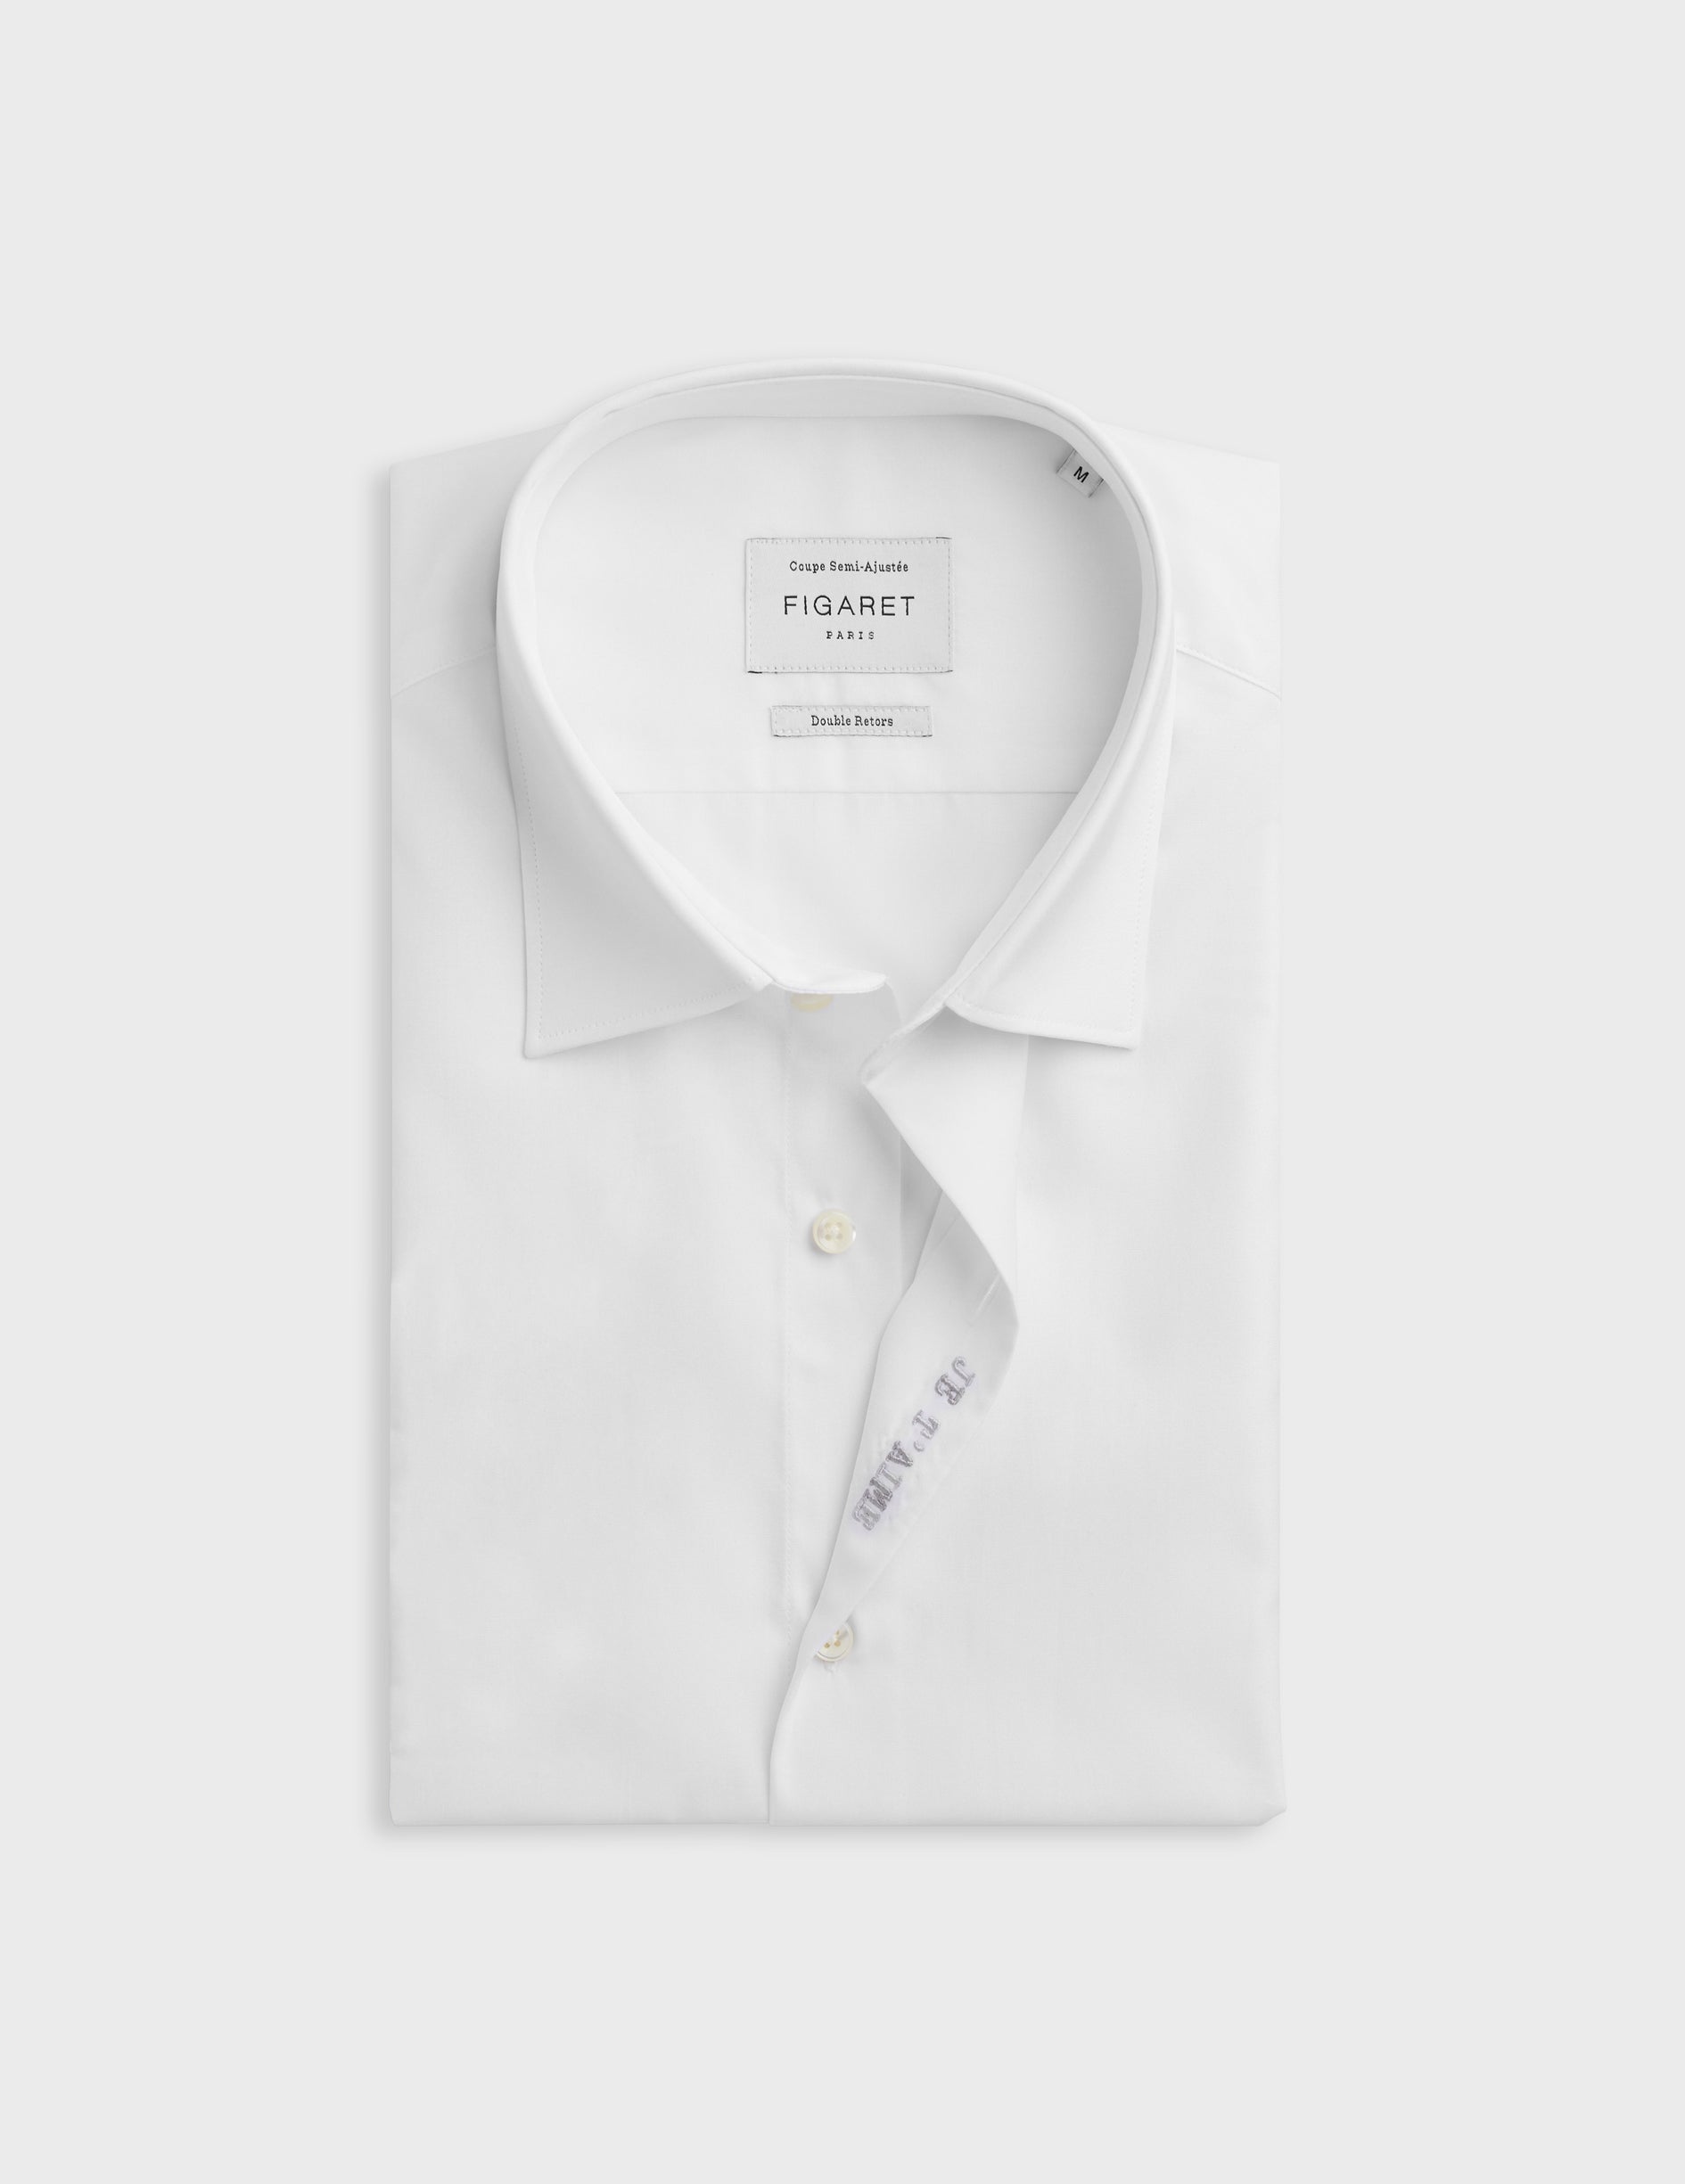 White "Je t'aime" shirt with grey embroidery - Poplin - Figaret Collar